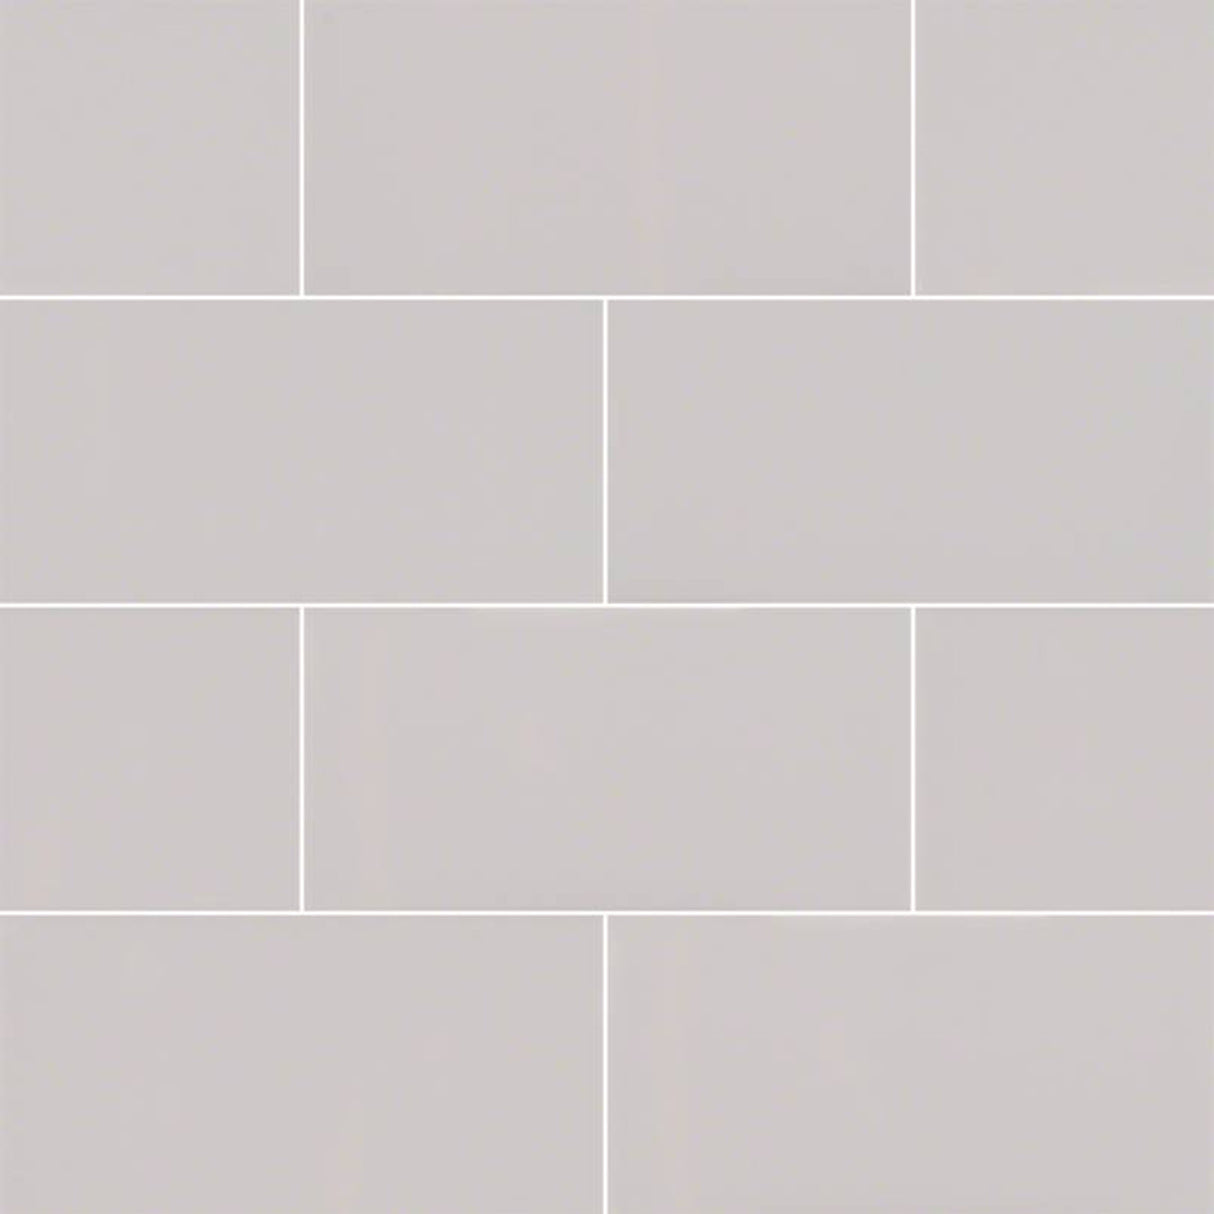 Gray glossy glazed ceramic wall tile msi collection NGRAGLO3X6 product shot multiple tiles angle view_a009204b e892 4ff9 8ab0 952414282a77 #Size_3"x6"